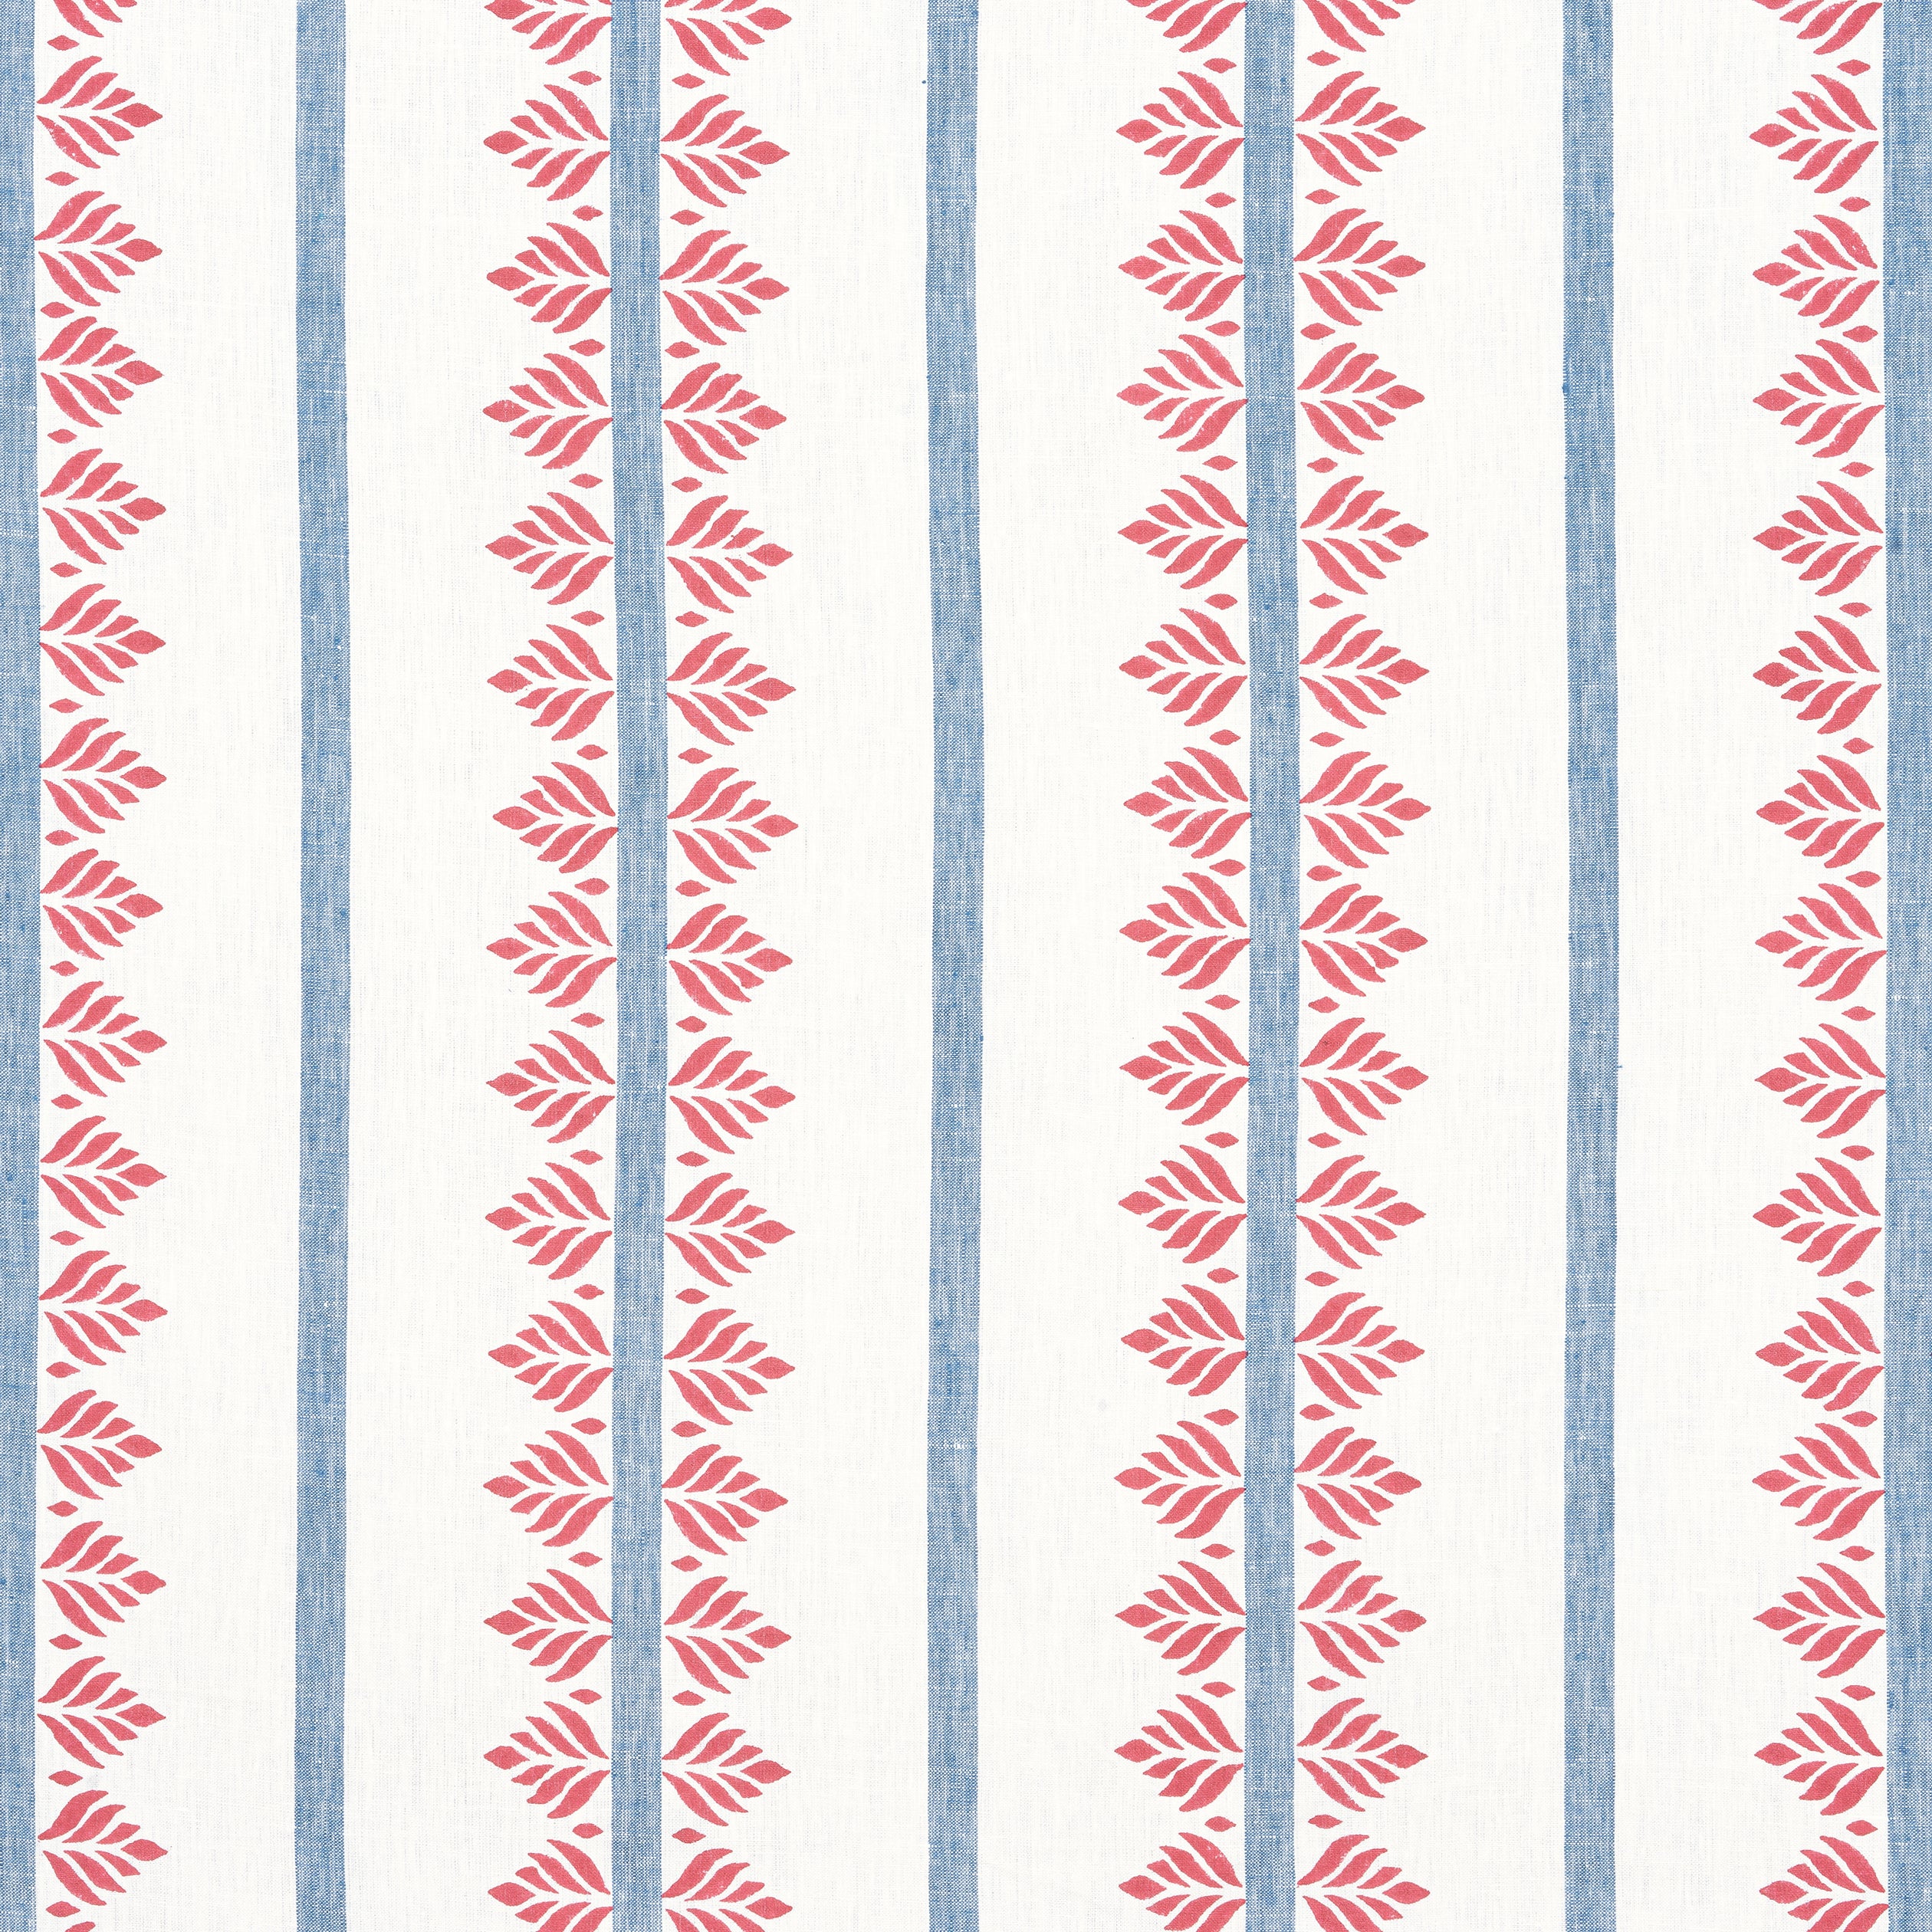 Fern Stripe fabric in red and blue color - pattern number AF15105 - by Anna French in the Antilles collection